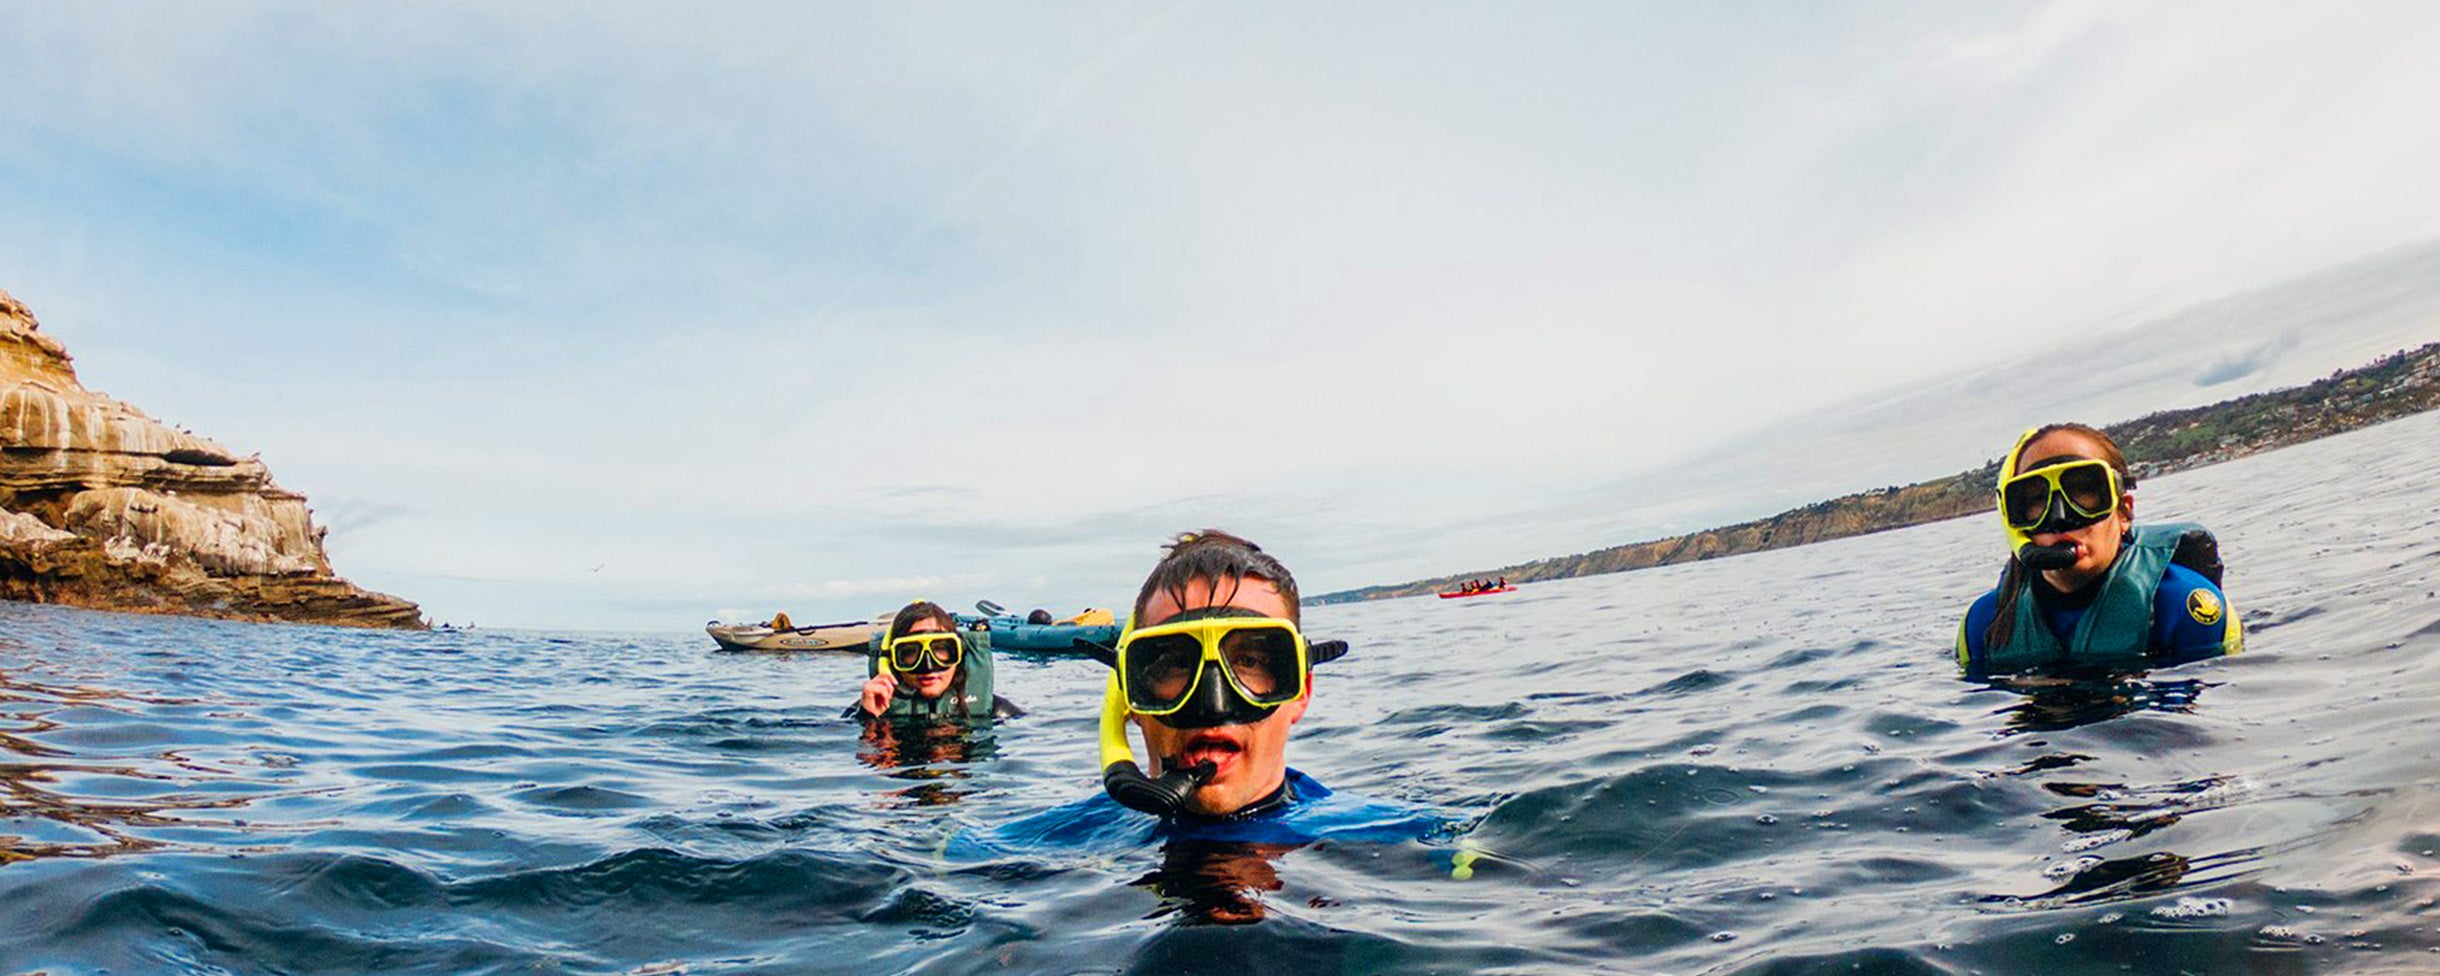 Tours - Snorkeling Tours available through Everyday California in La Jolla, California. 3 snorkelers in the Pacific Ocean in San Diego. 